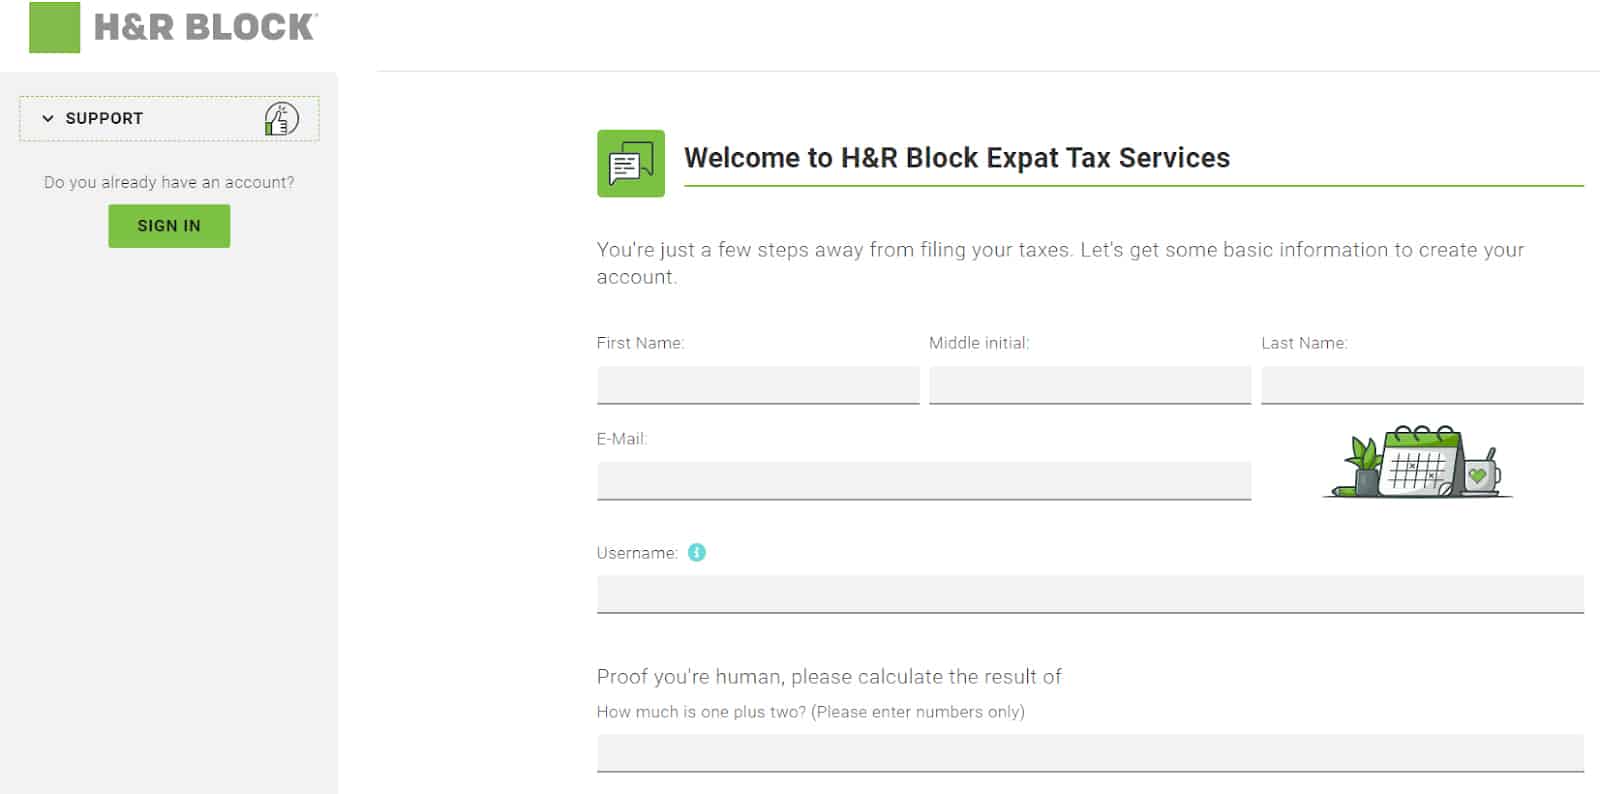 H&R Block Expat Tax Services page, filing some basic information.